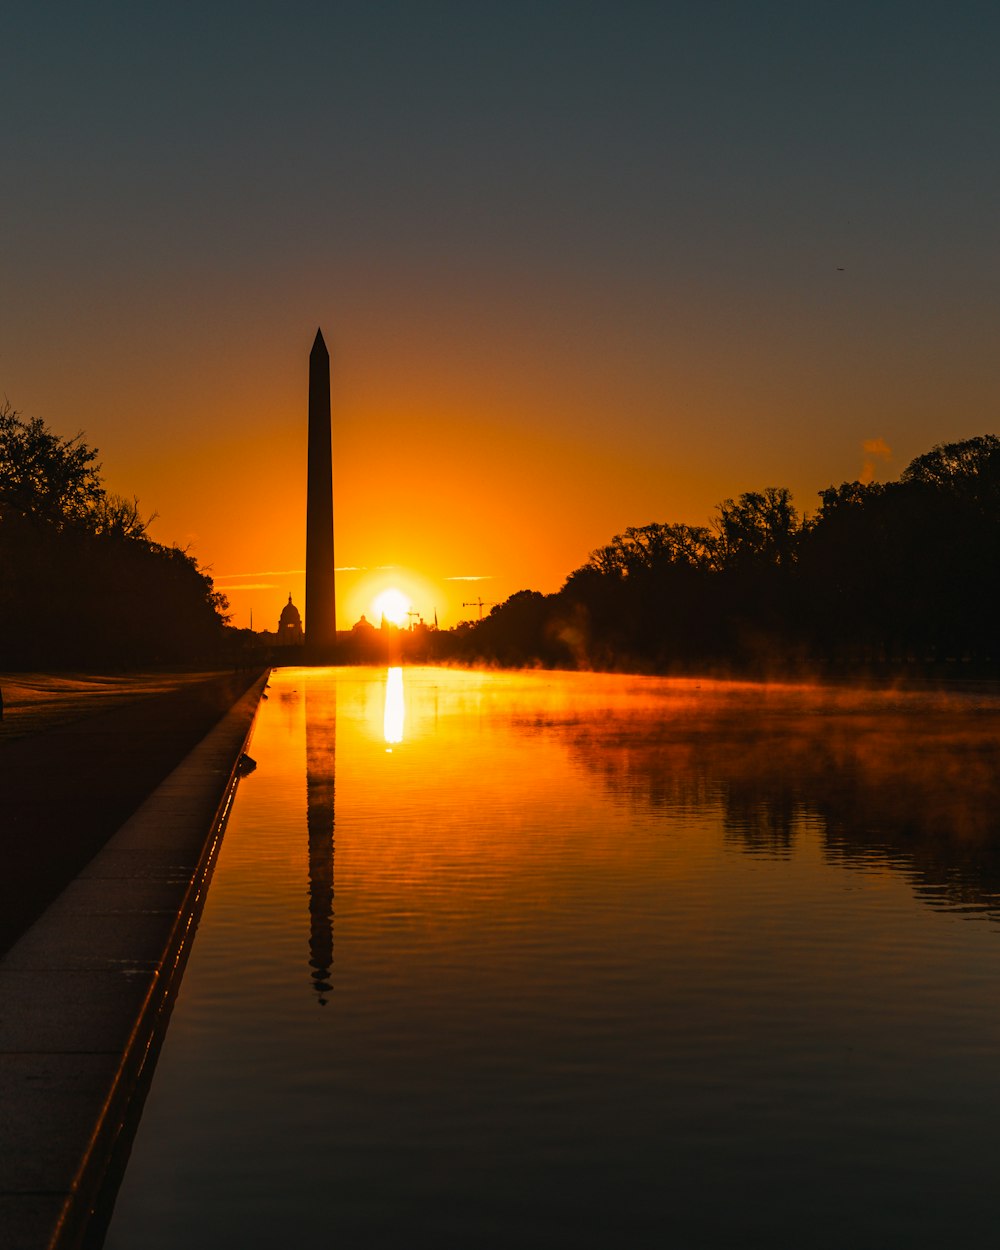 the sun is setting over the washington monument